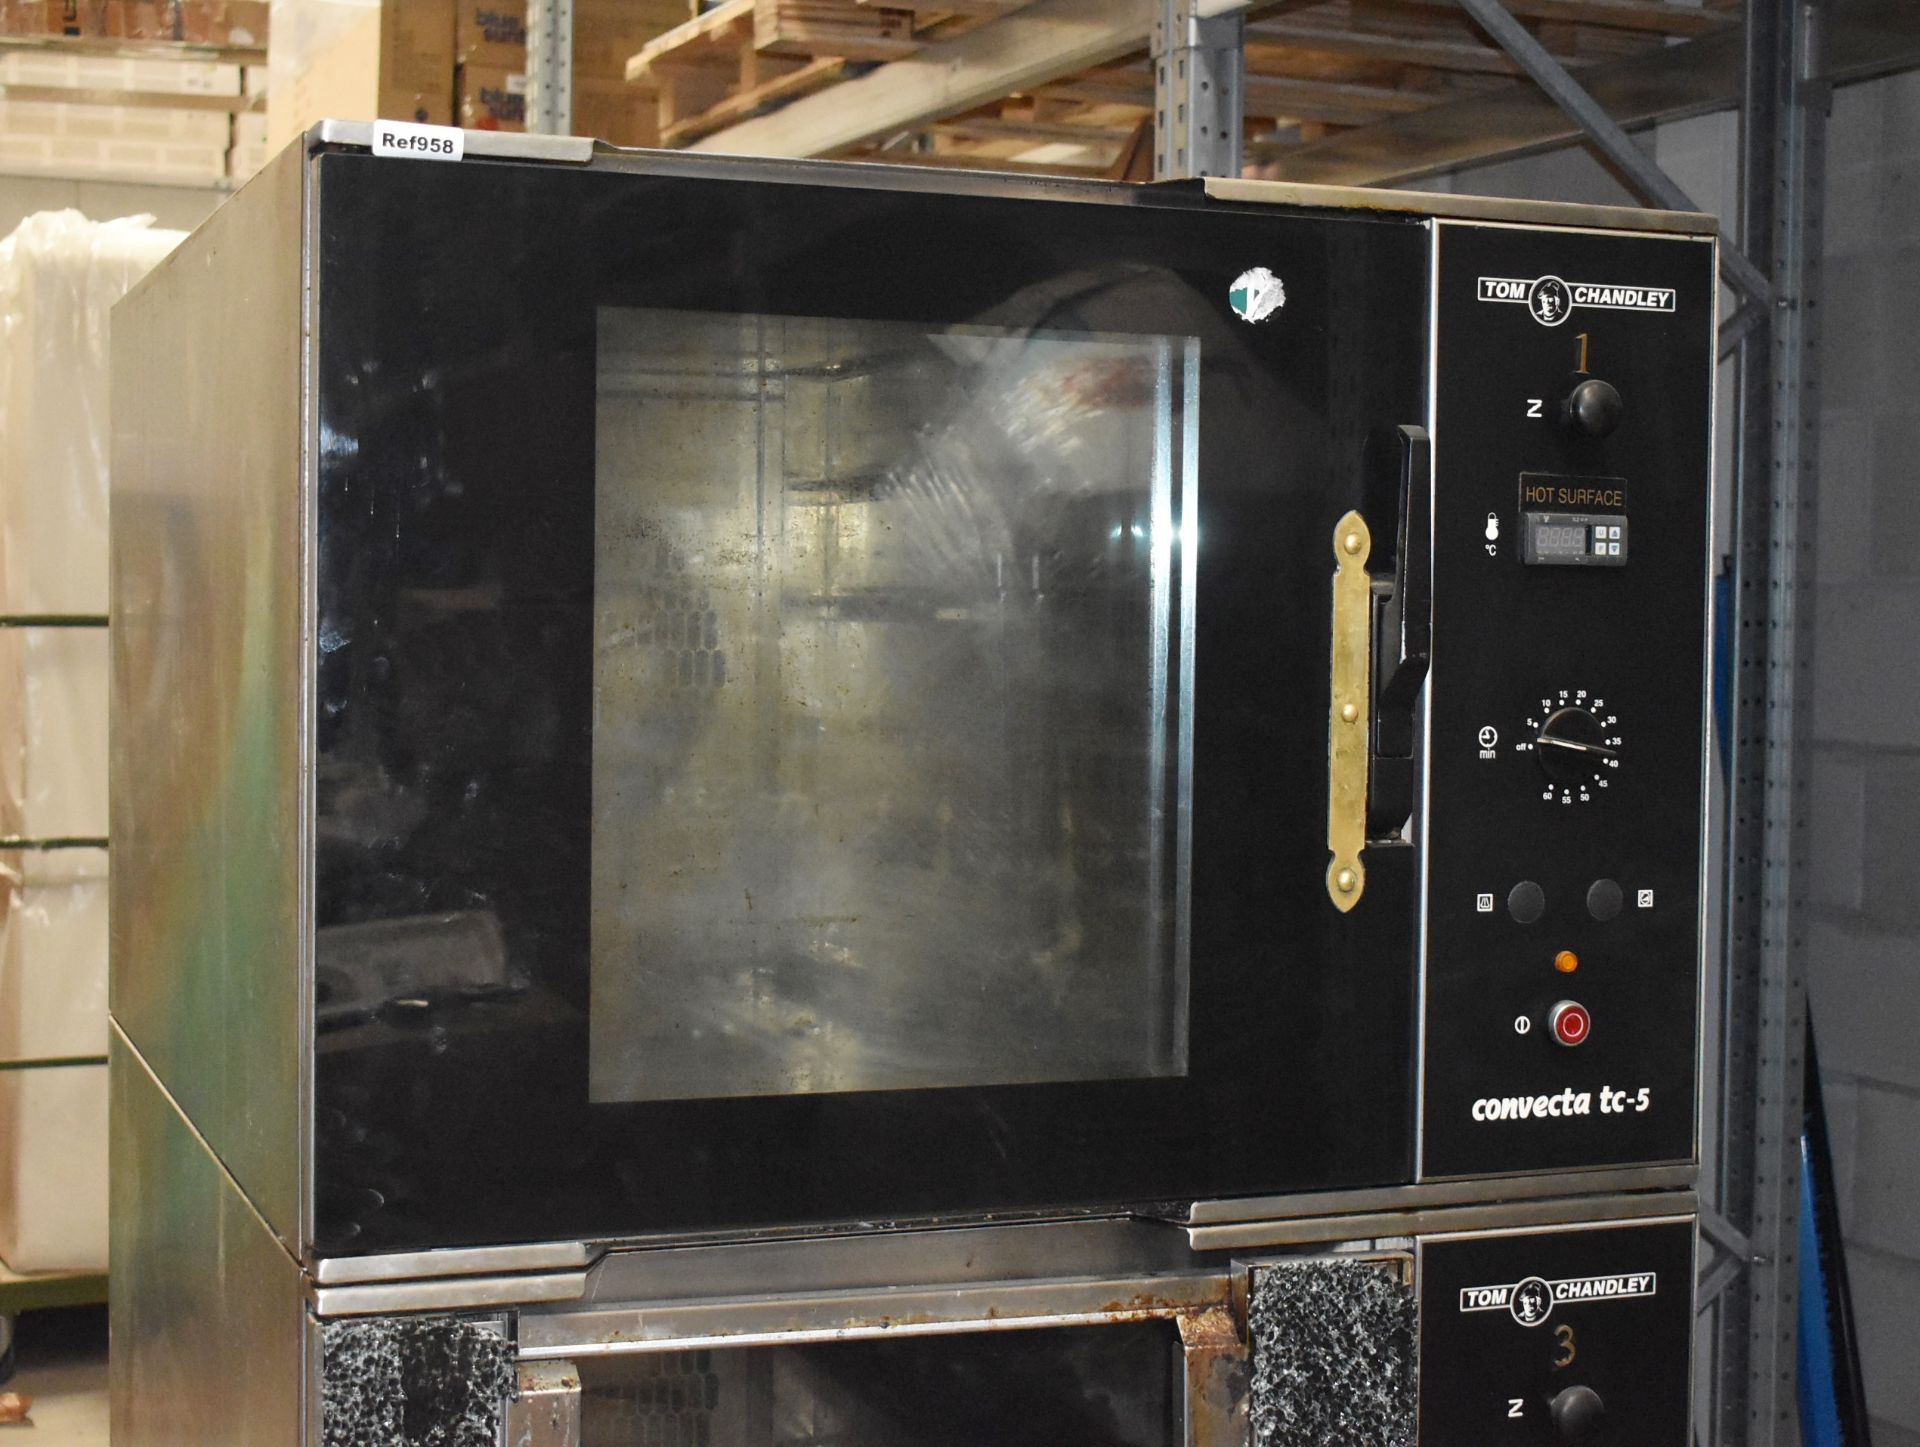 1 x Tom Chandley Double Door Bakey Oven - 3 Phase - Model TC53018 - Removed From Well Known - Image 3 of 8